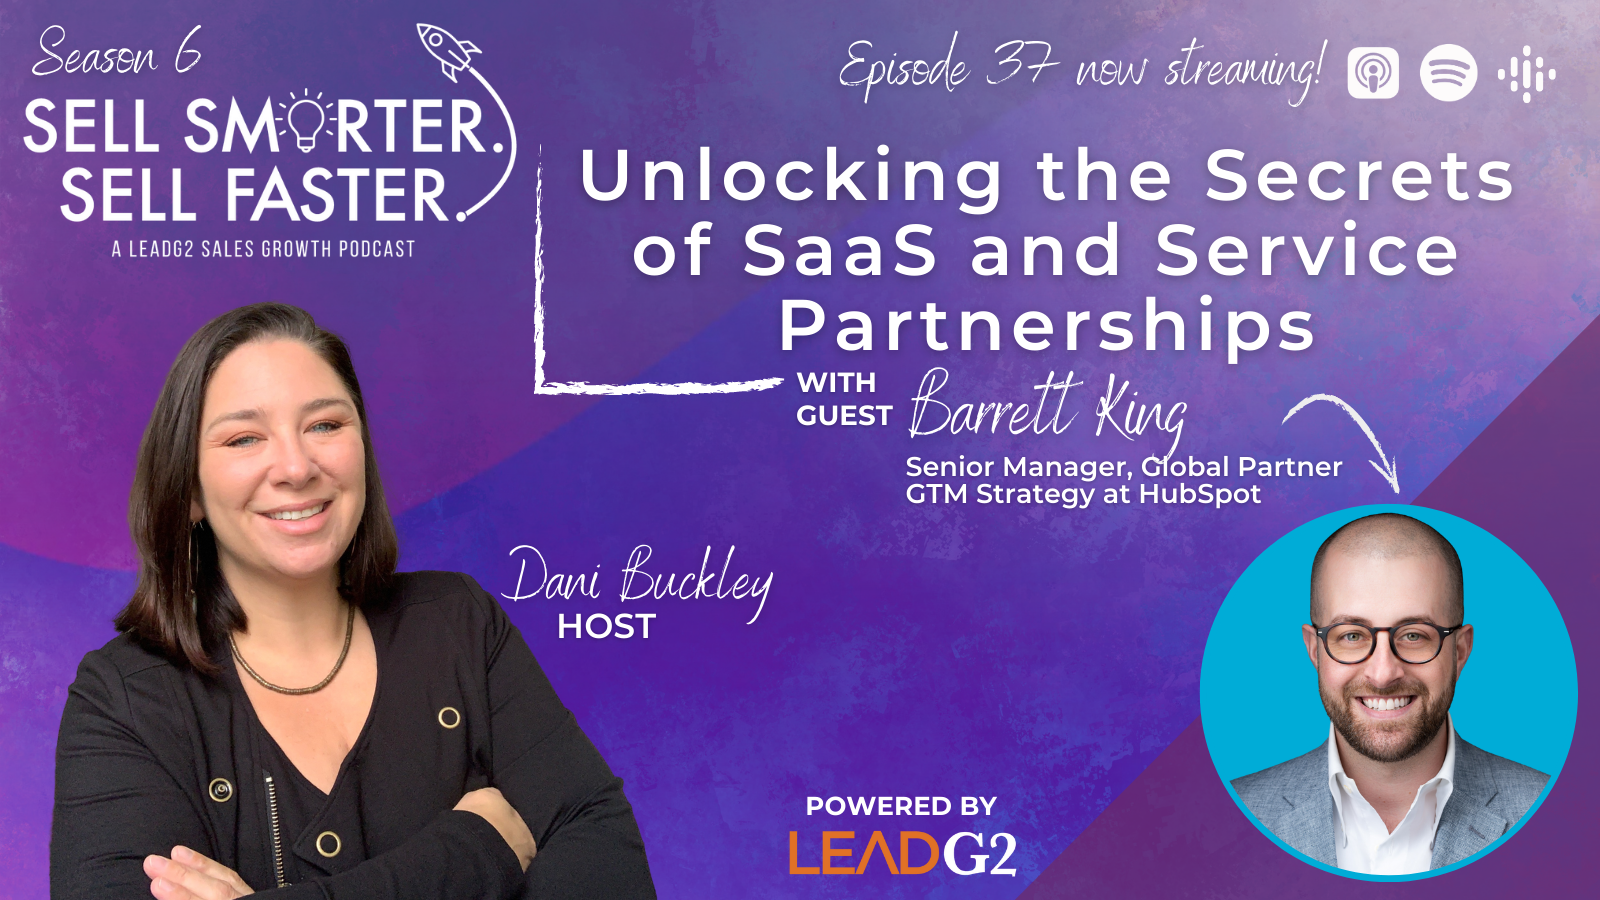 Unlocking the Secrets of SaaS and Service Partnerships with Barrett King